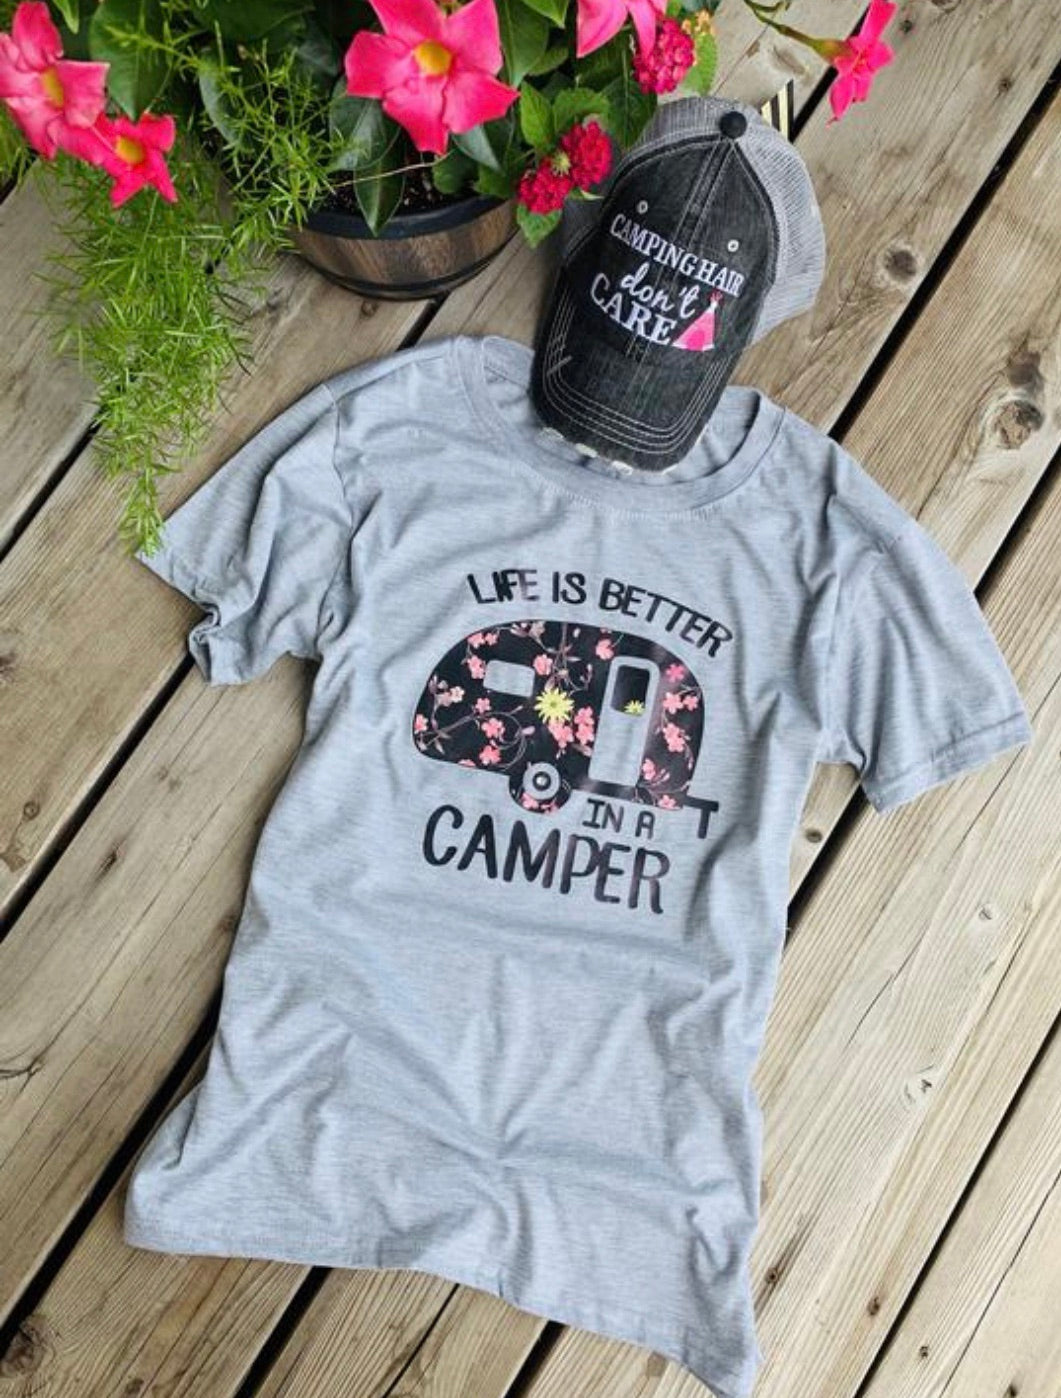 Shirts { Life is better in the camper } 1 left in XL $10 sale! All other sizes available for $15. - Stacy's Pink Martini Boutique